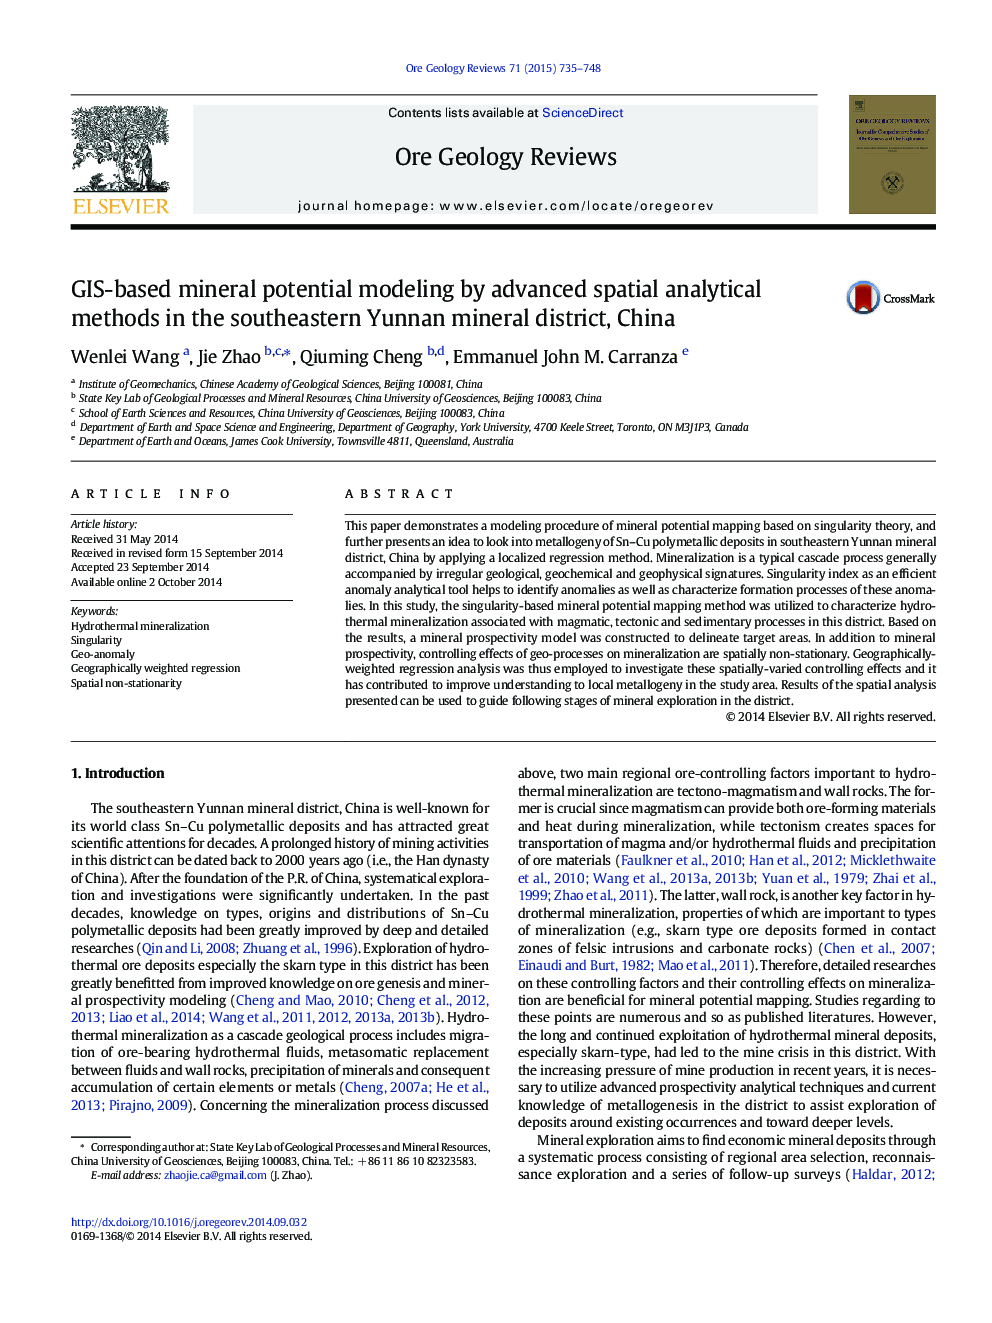 GIS-based mineral potential modeling by advanced spatial analytical methods in the southeastern Yunnan mineral district, China